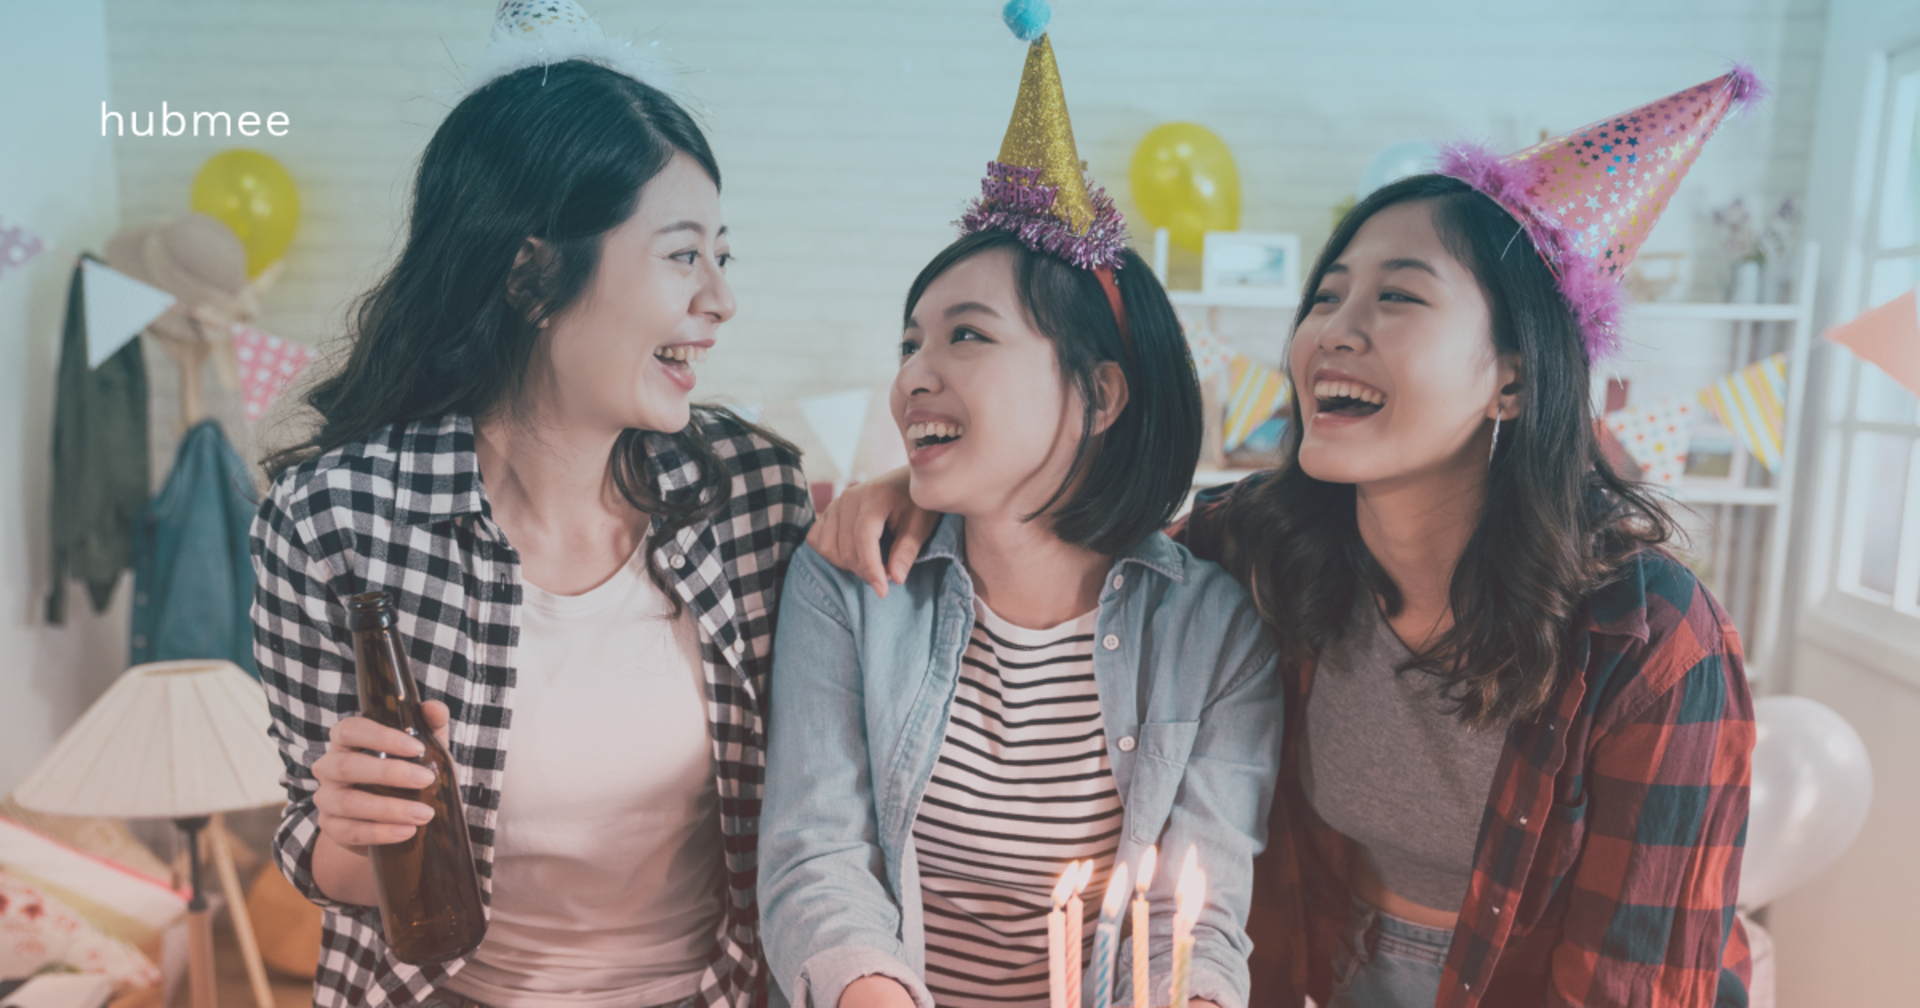 How to organize the best party with hubmee